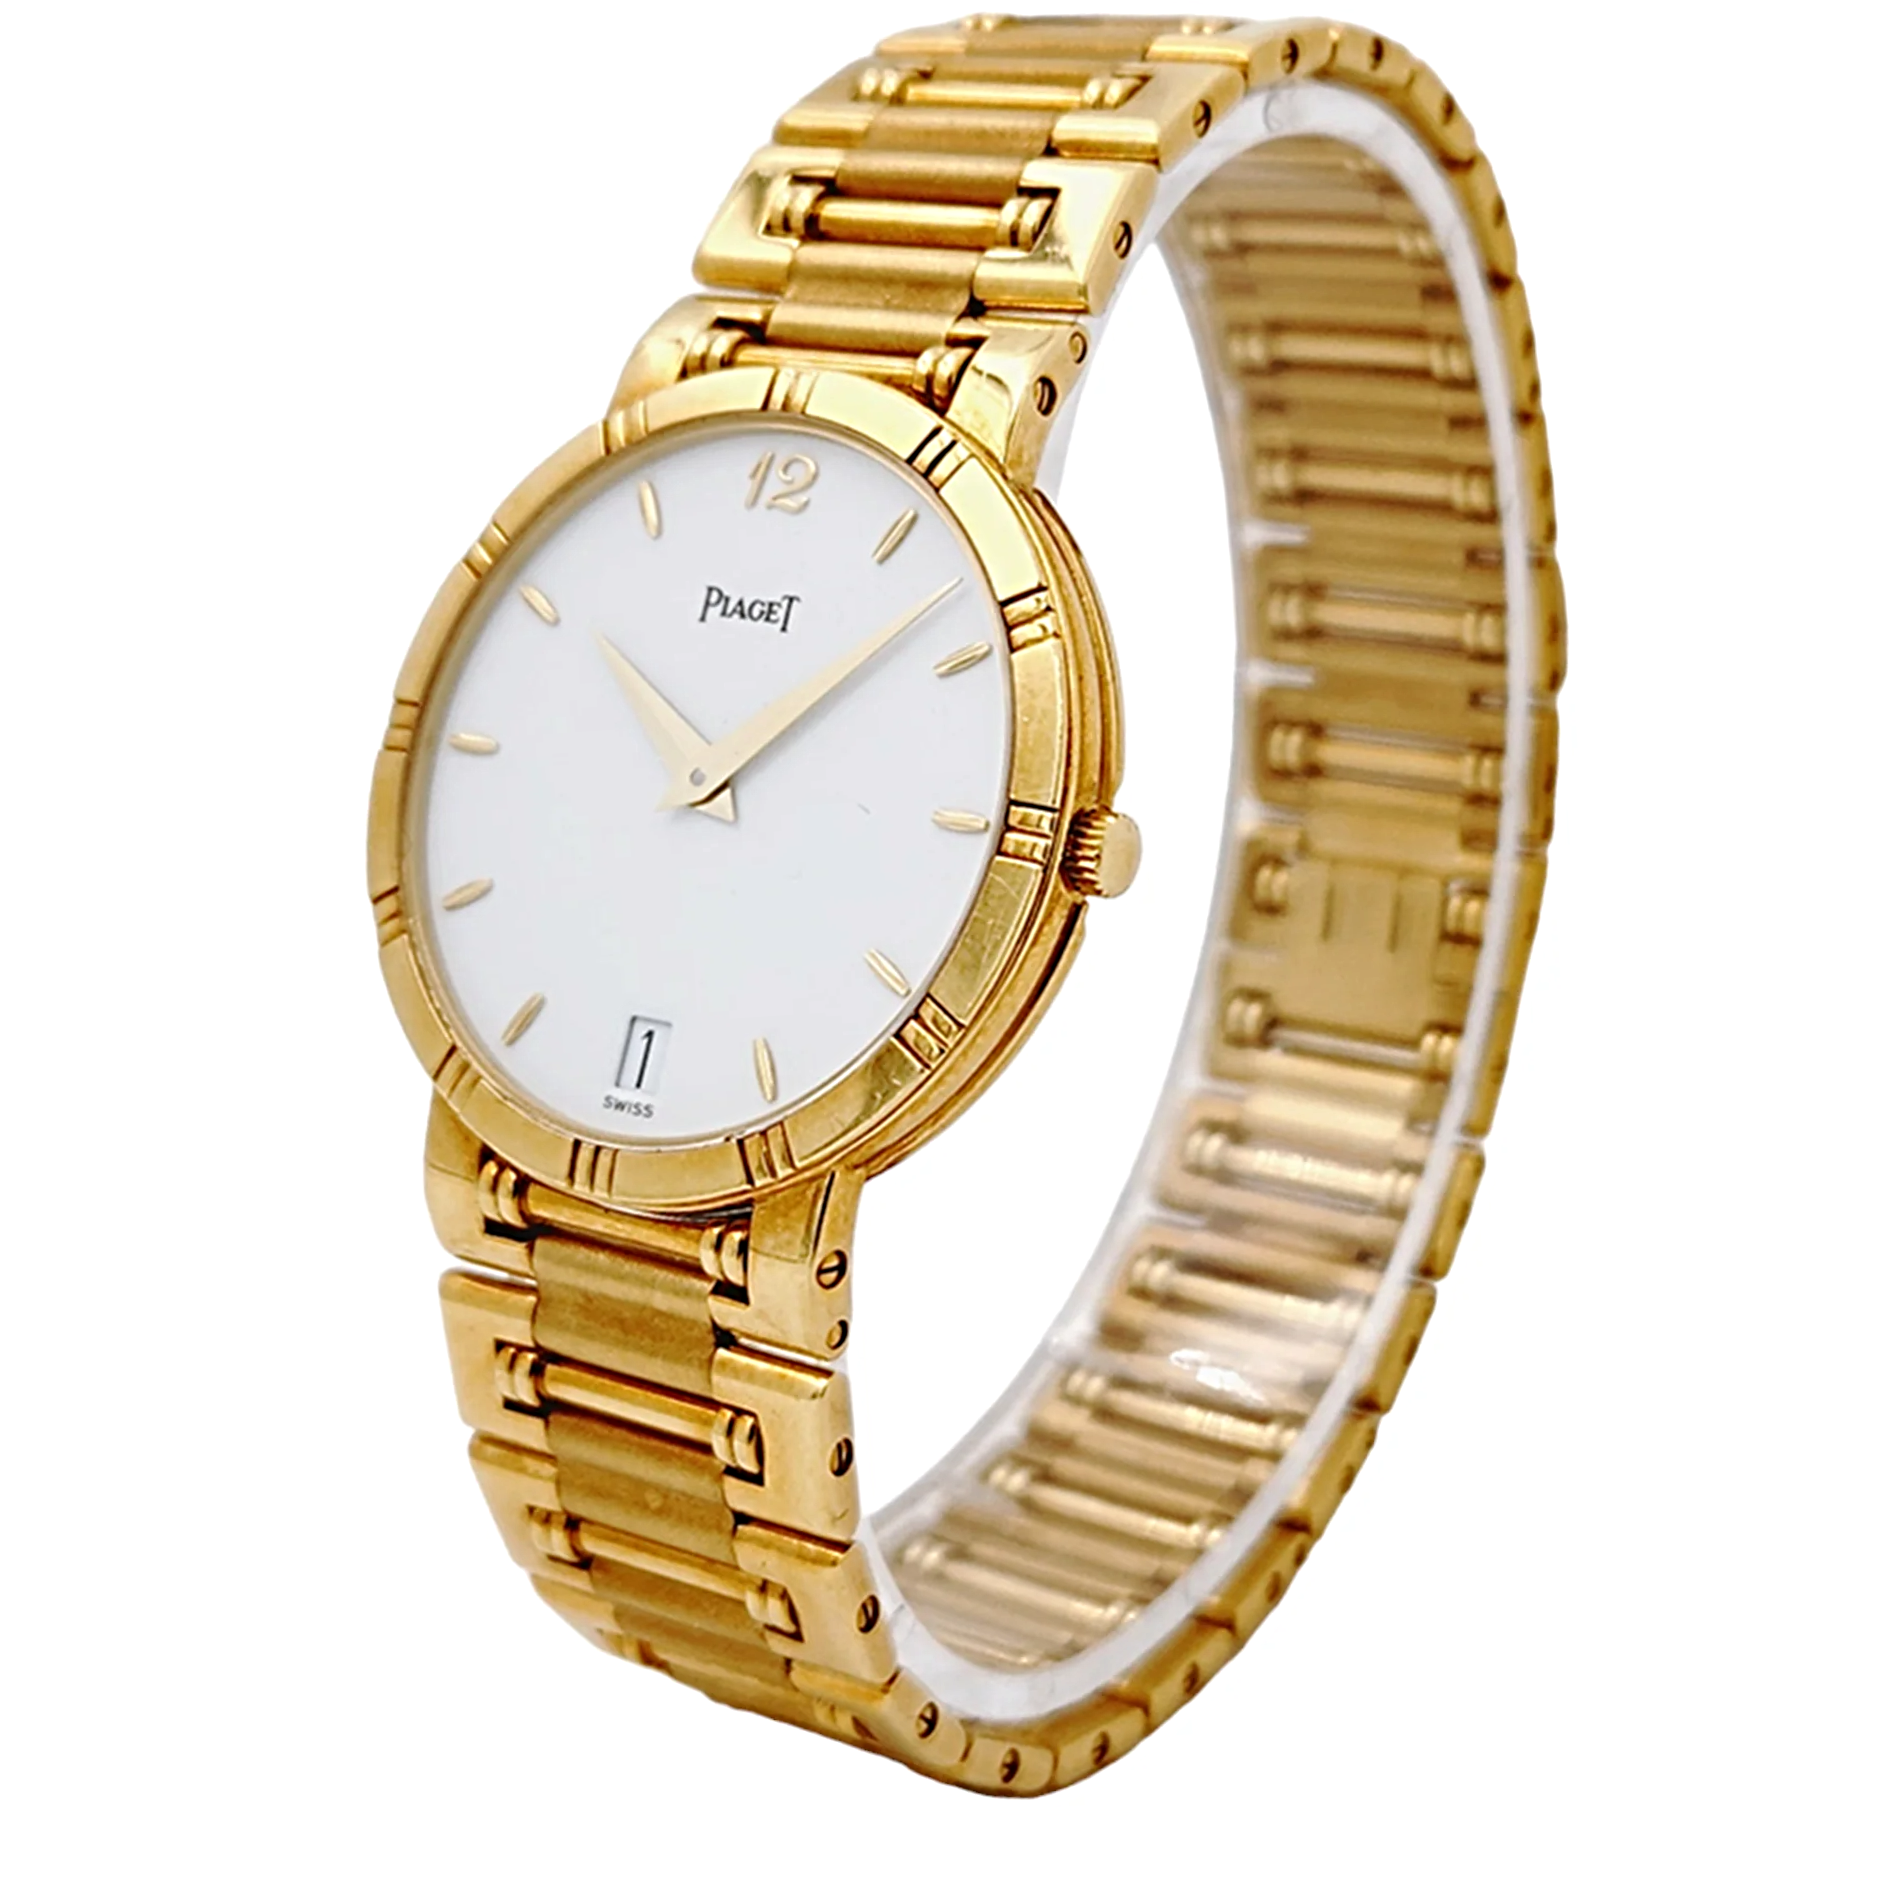 *Men's Piaget 31mm Dancer Vintage Solid 18K Yellow Gold Band Watch with White Dial. (Pre-Owned)